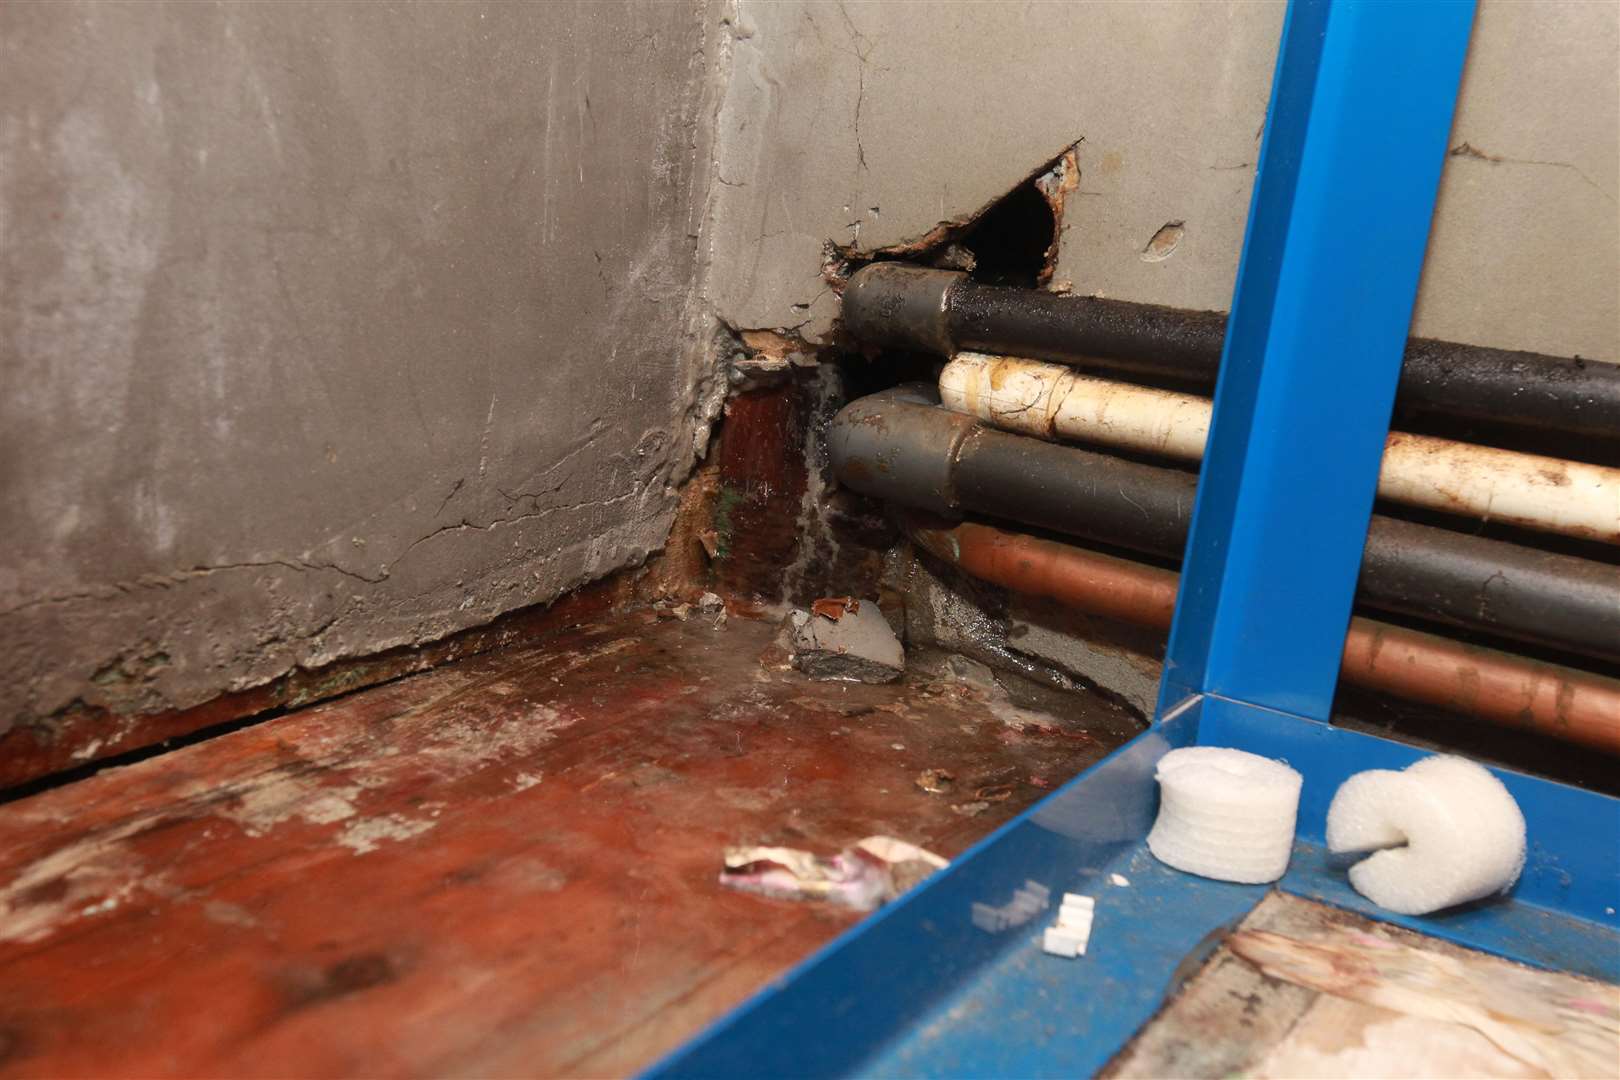 Stephen Care is extremely worried about the electrics coming into contact from leaky pipes from the water tank in his flat. Picture: John Westhrop. (11079370)